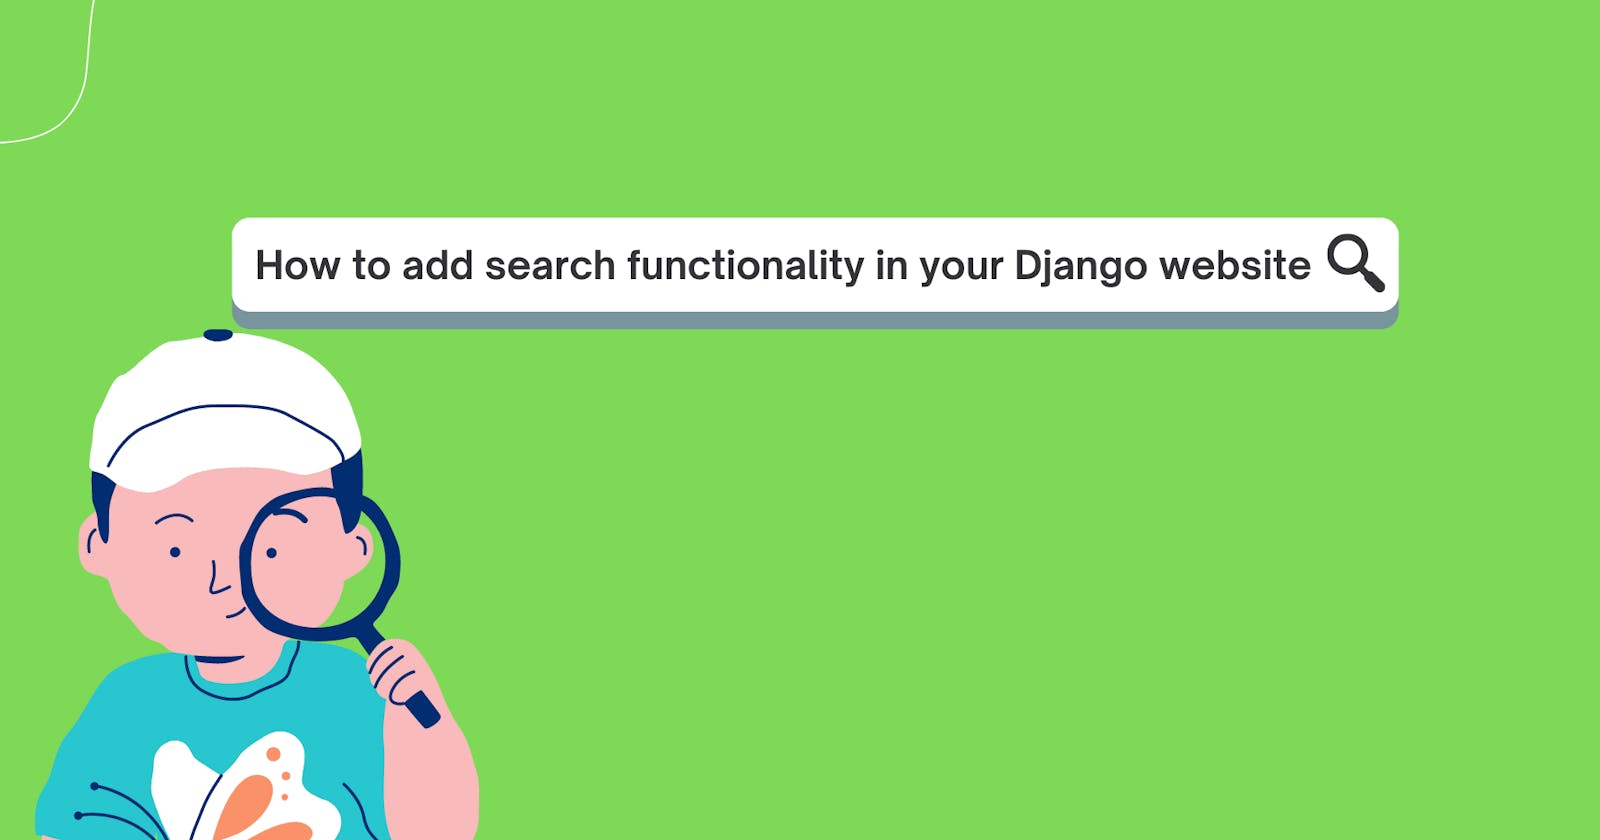 Implementing Search functionality in your Django website